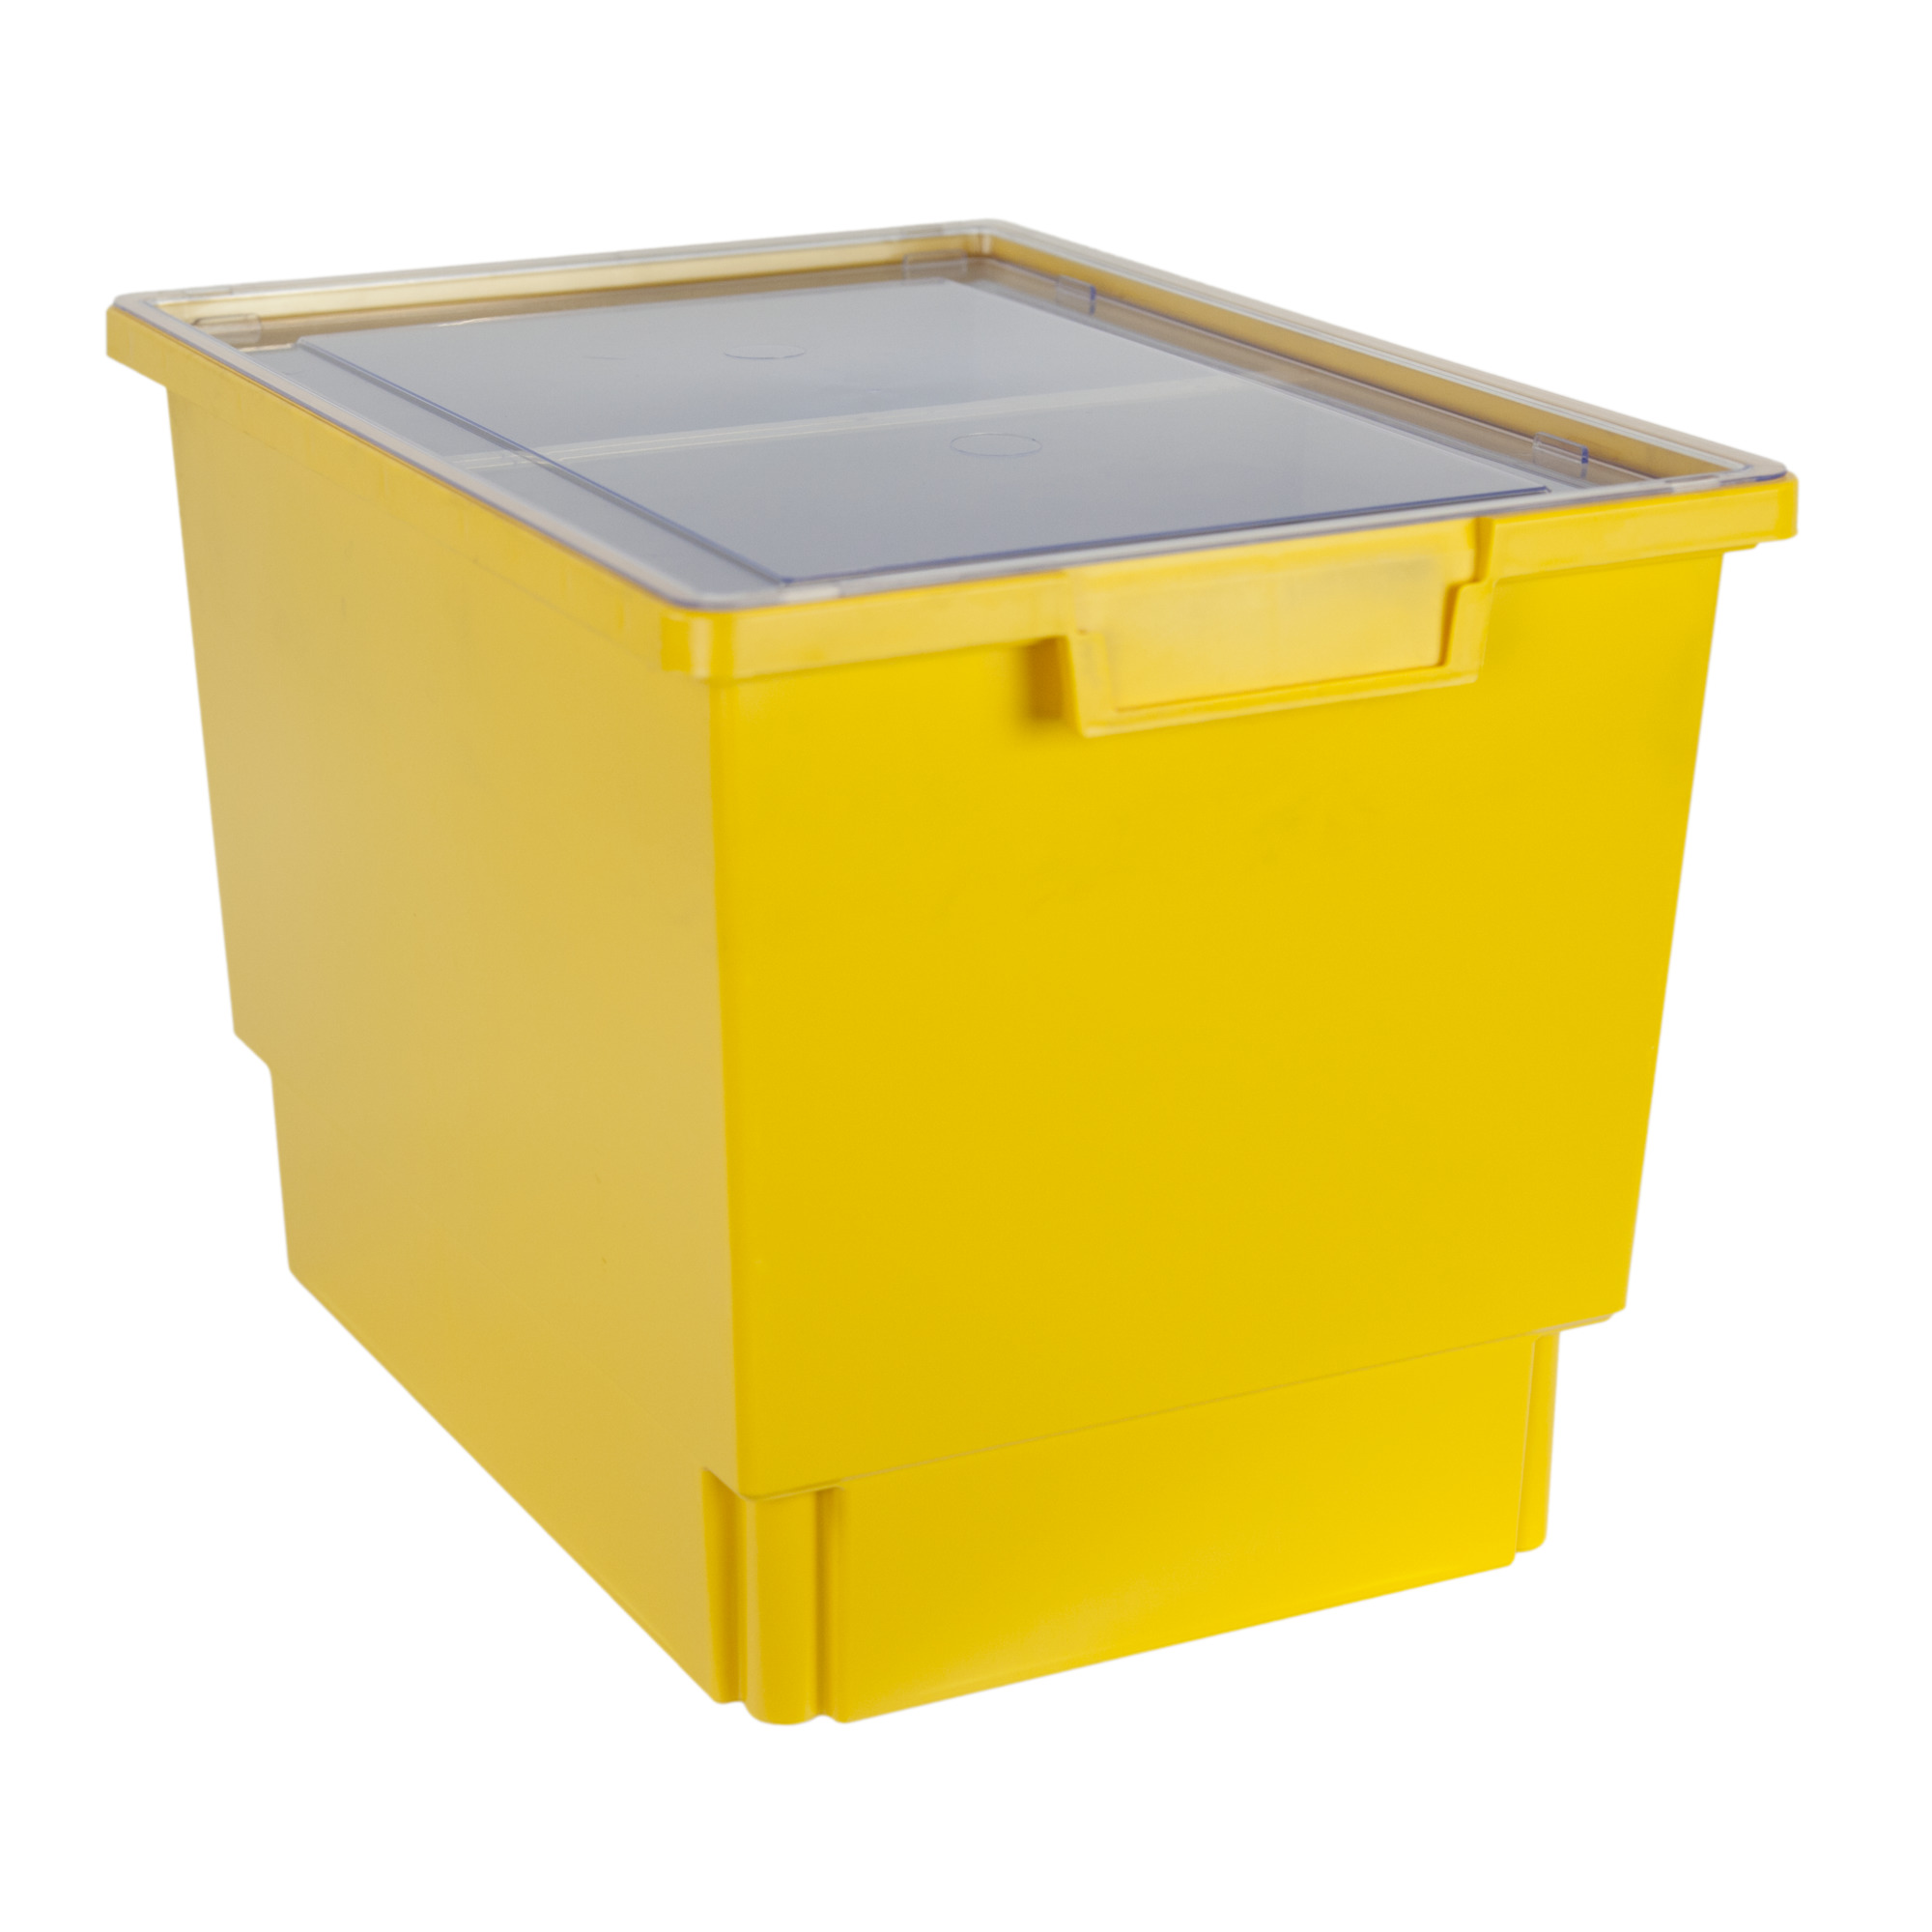 Certwood StorWerks, Slim Line 12Inch Tray Kit (2 x Divisions) Yellow-3PK, Included (qty.) 3, Material Plastic, Height 12 in, Model CE1954PY-NK0404-3